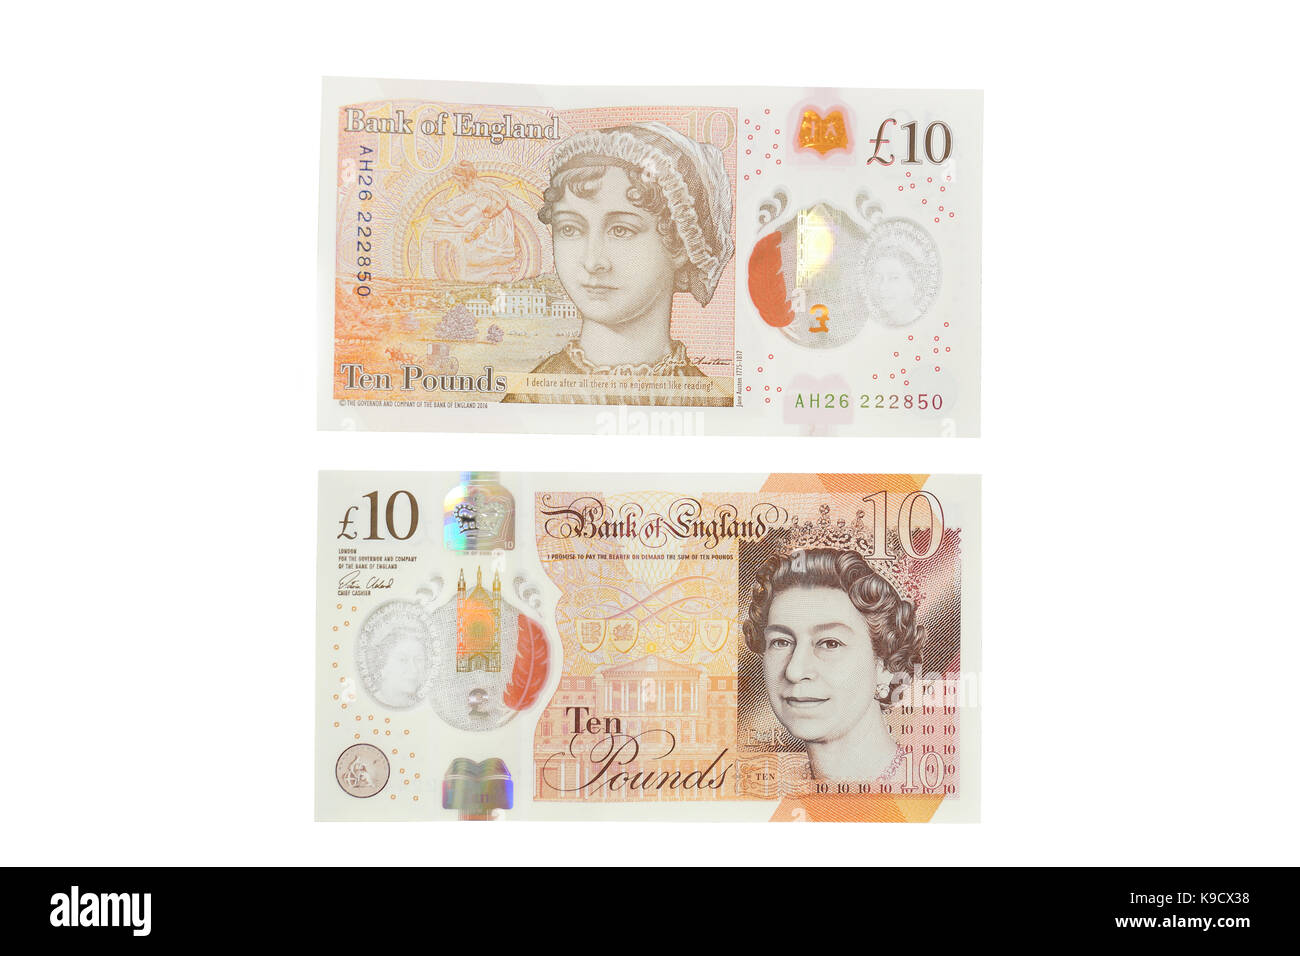 The newly introduced currency of the United Kingdom - The polymer ten pound (£10) note with features more measures against counterfitters. Stock Photo